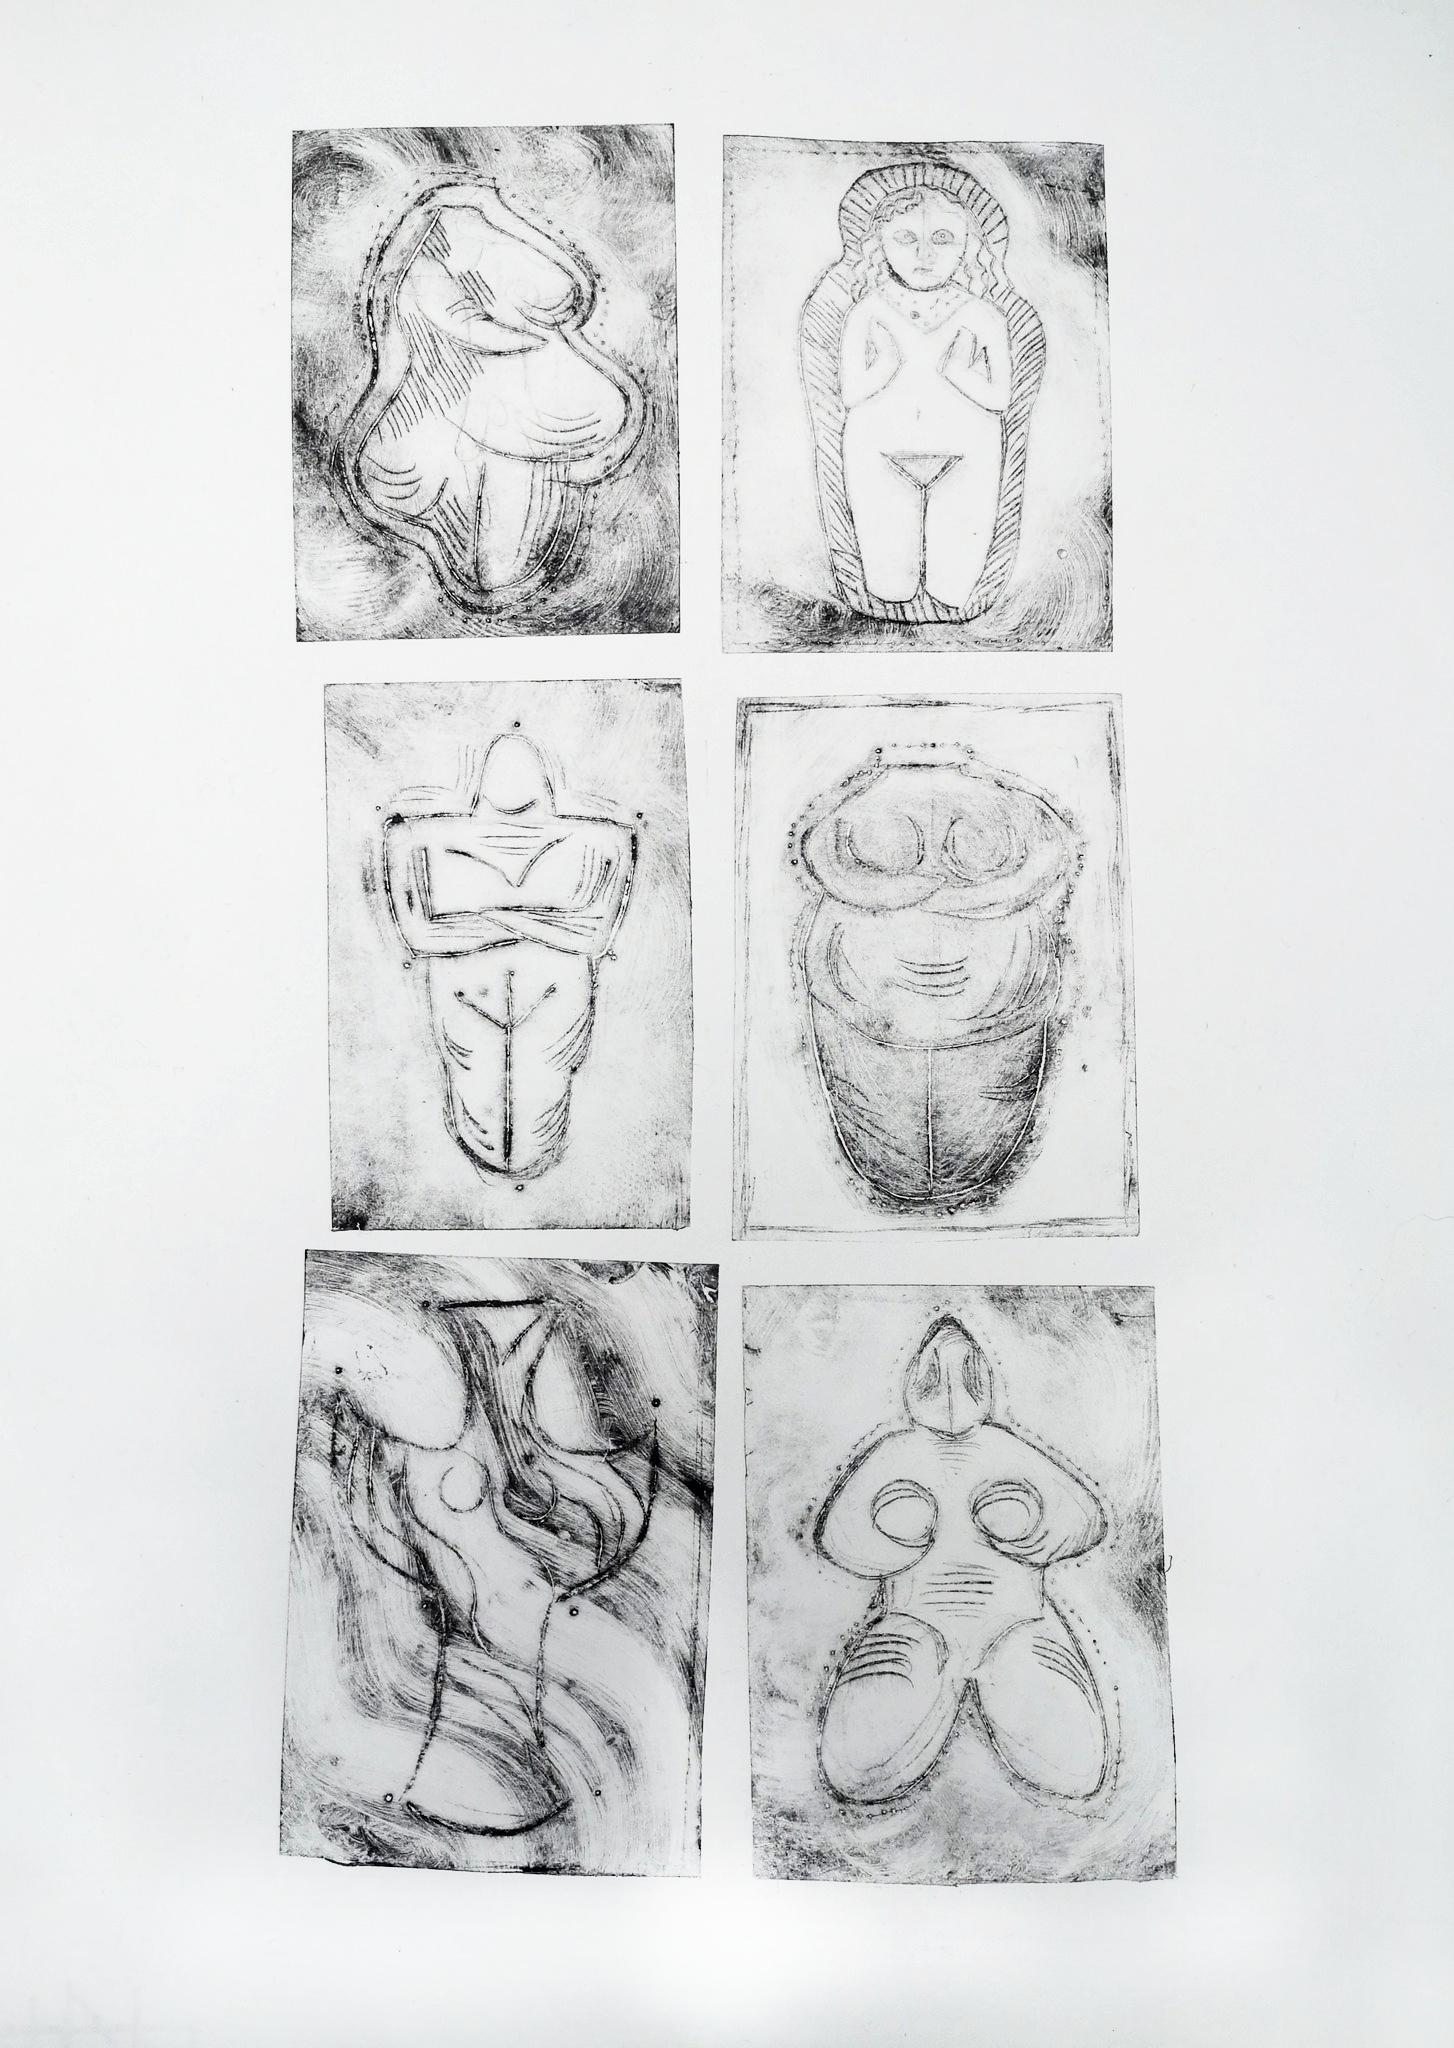 A series of drypoint prints in black ink on white paper of different Goddess sculptures found in the Futzwilliam Museum Cambridge.